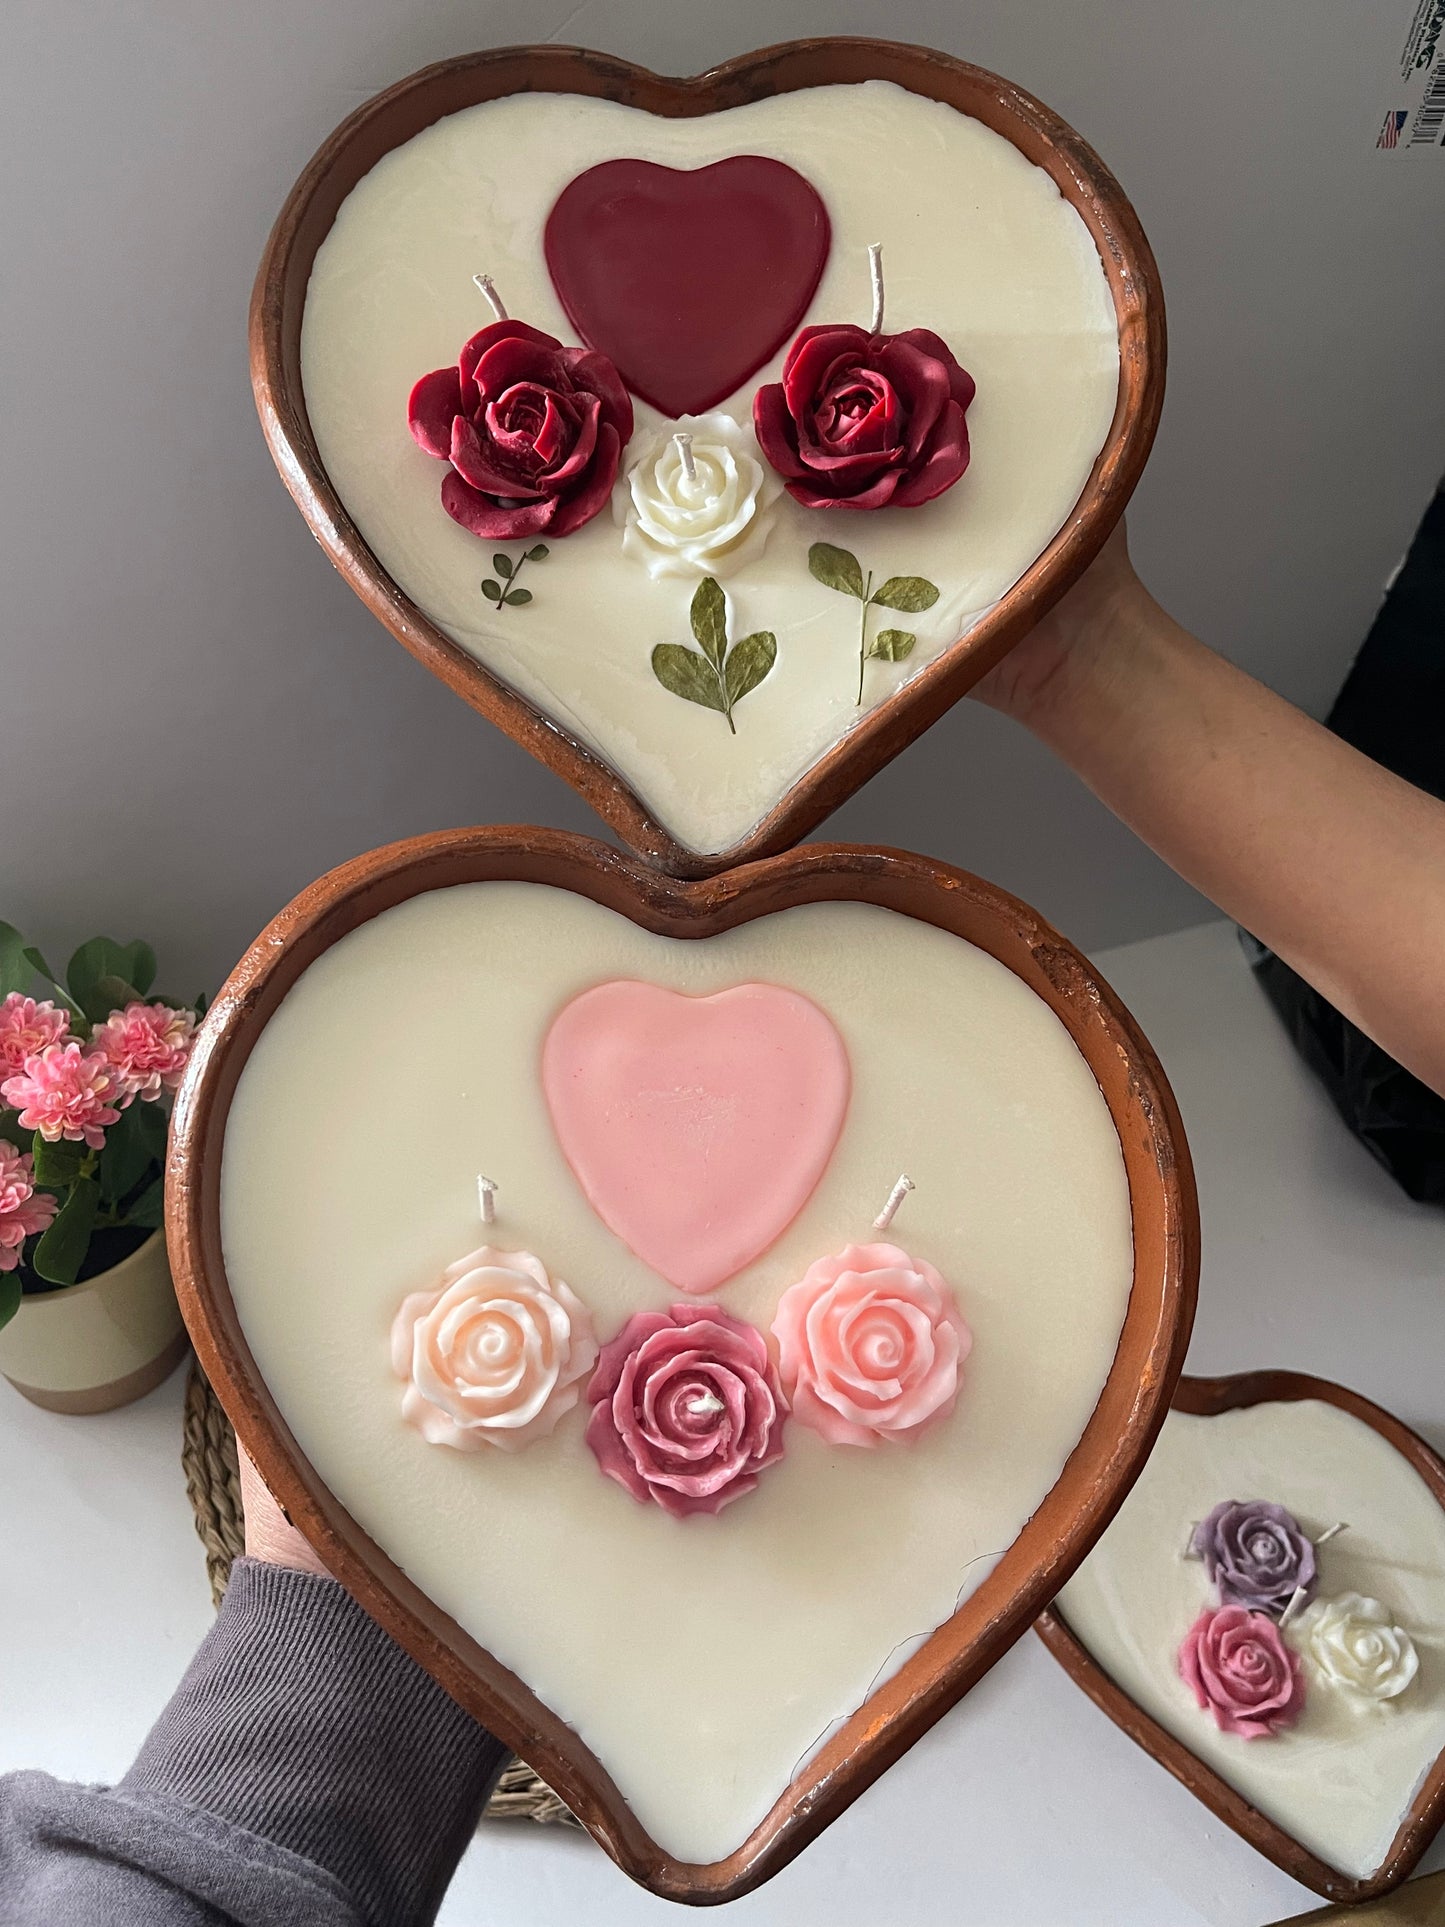 Mother’s Day Sale! Vela Corazon de Mamá/Moms heart candle/unscented  wax candle/handmade/handpoured/Mother’s Day gift/valentines gift/artisanal candles